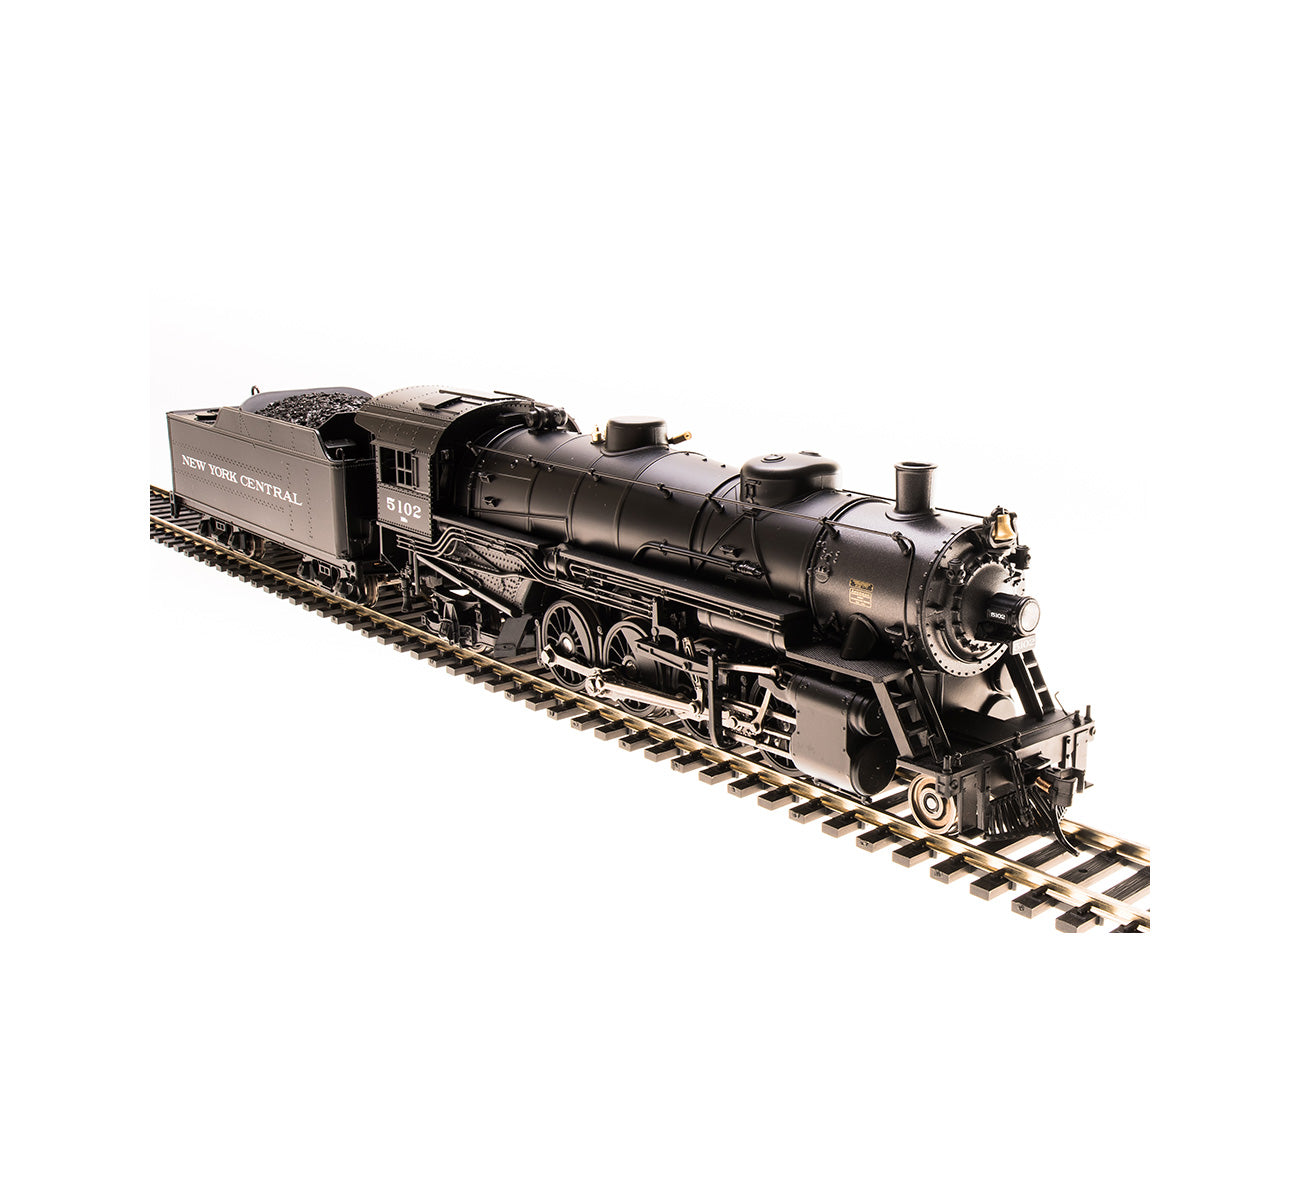 Broadway Limited 5571 HO New York Central 2-8-2 Lt Mikado with Sound & DCC #5102